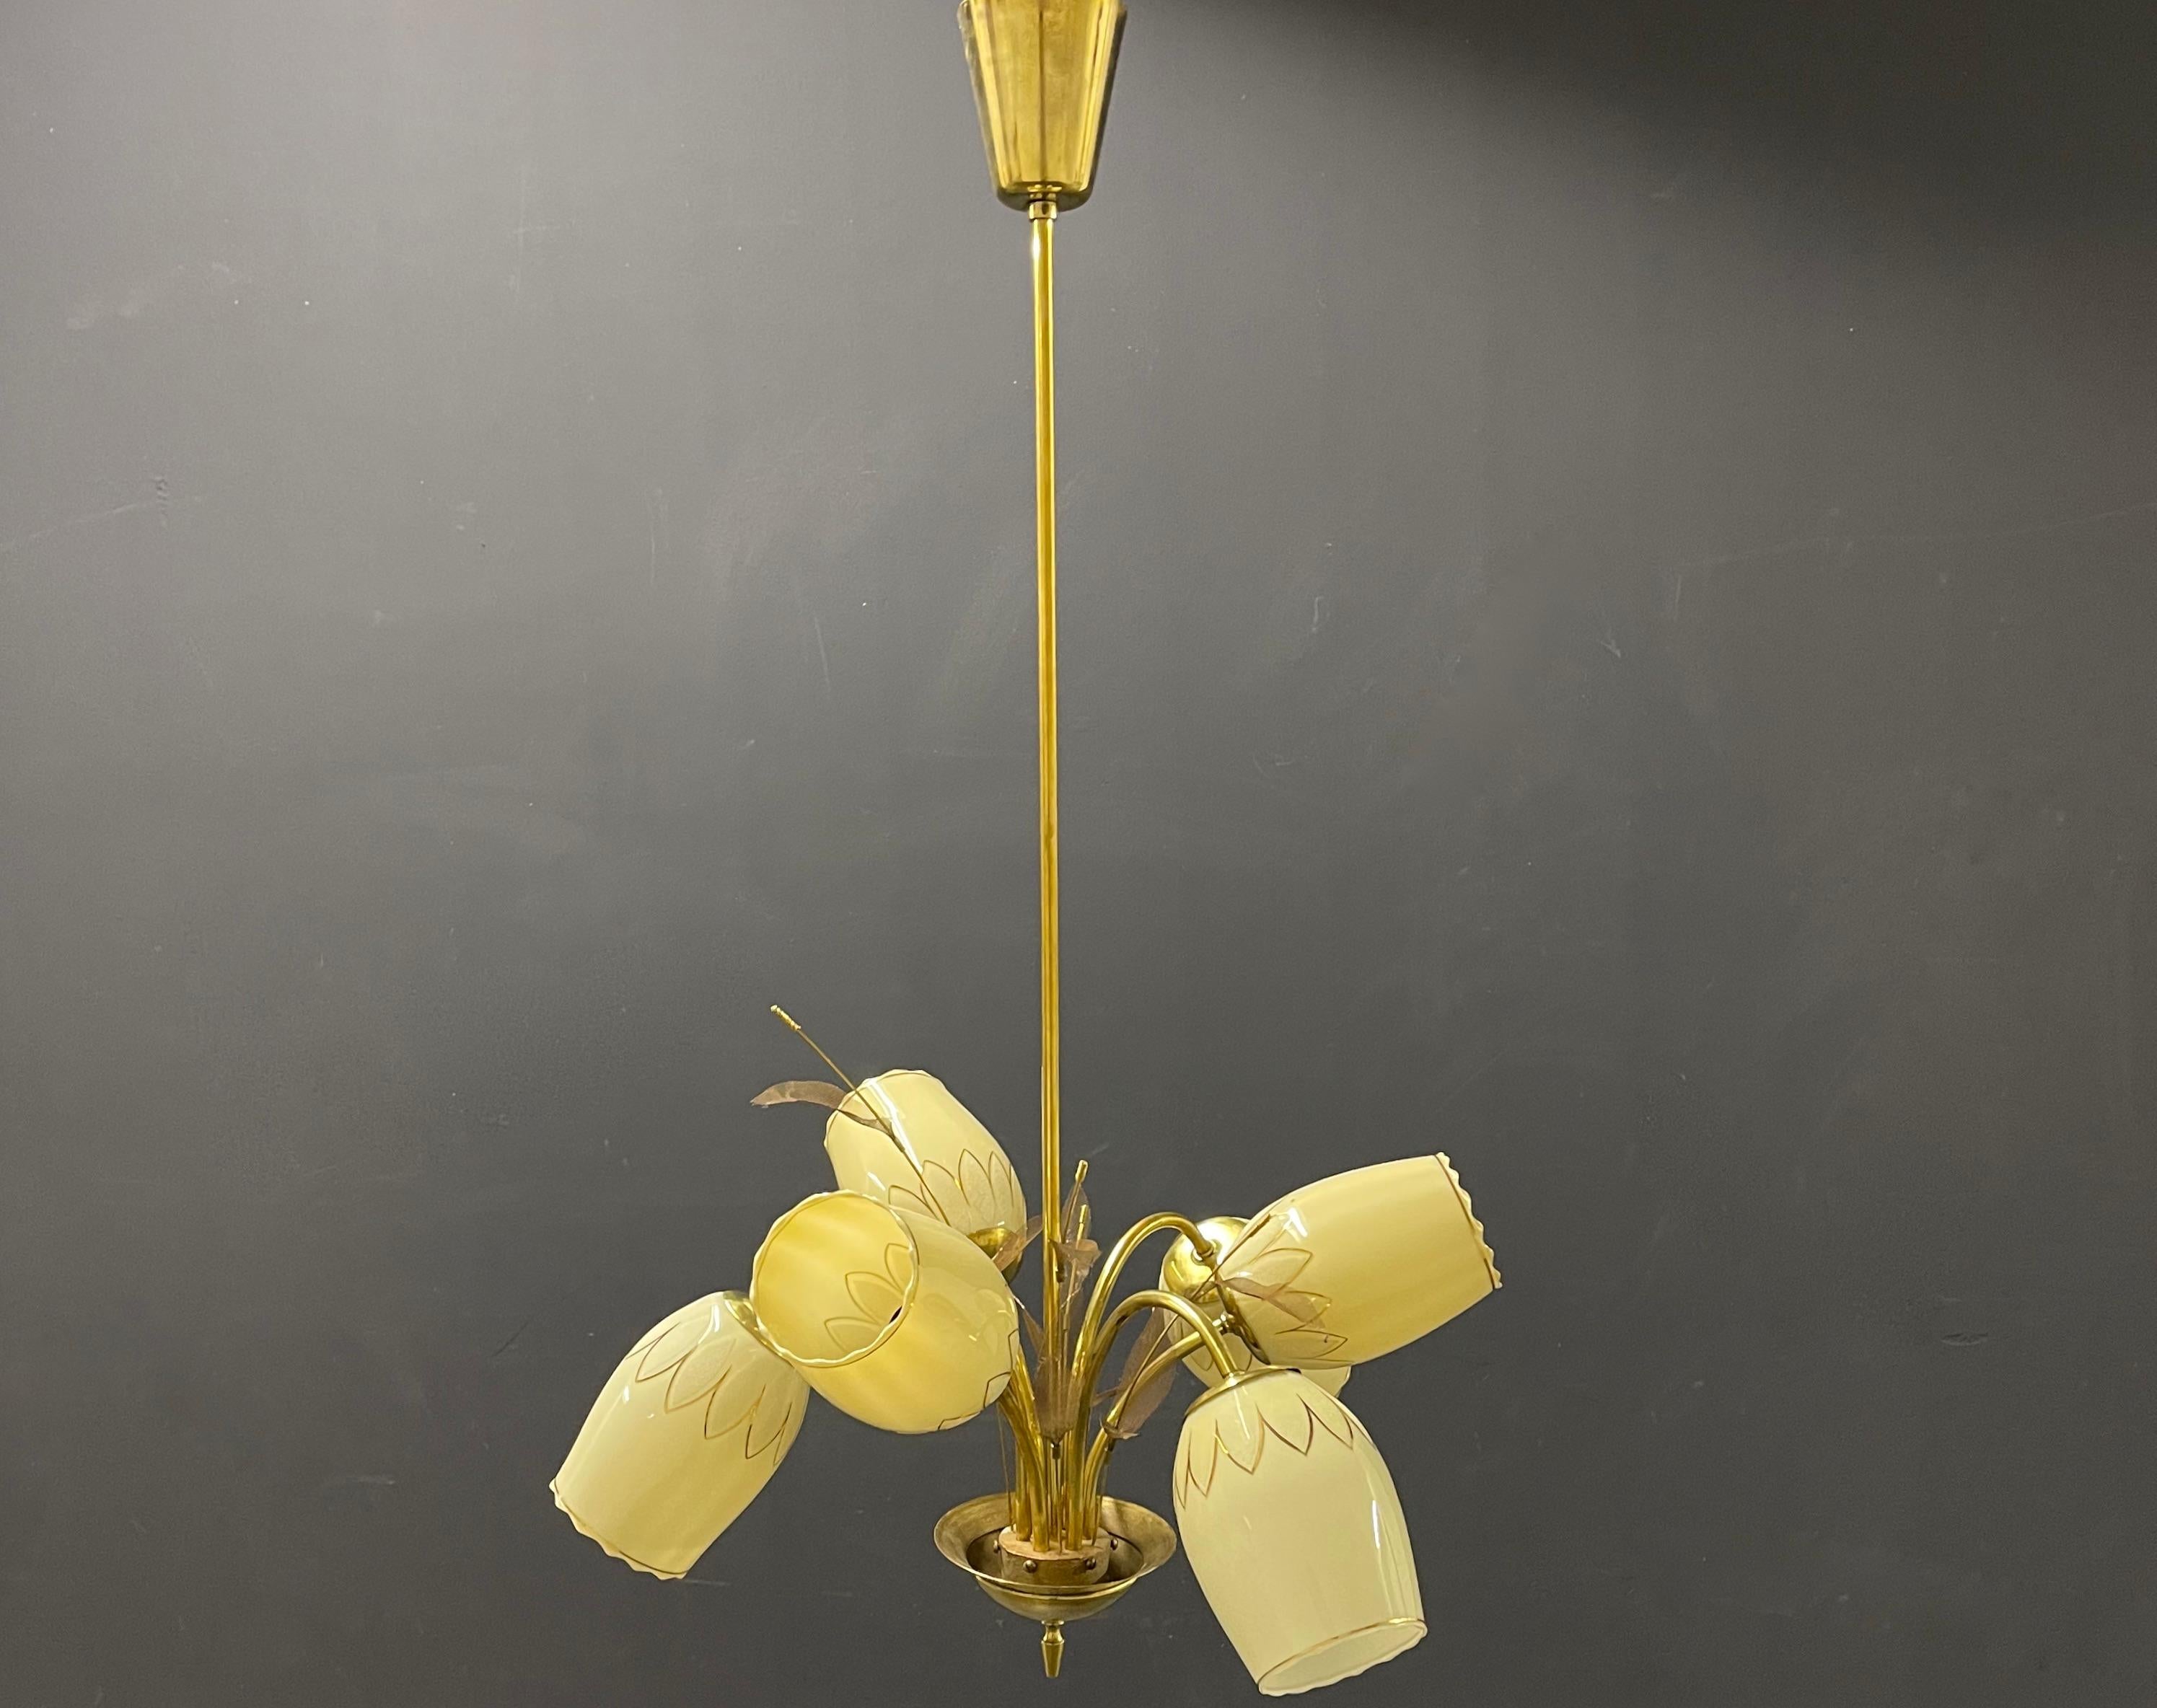 wonderful ceiling lamp from finland simular to many paavo tynell designs. unsigned.